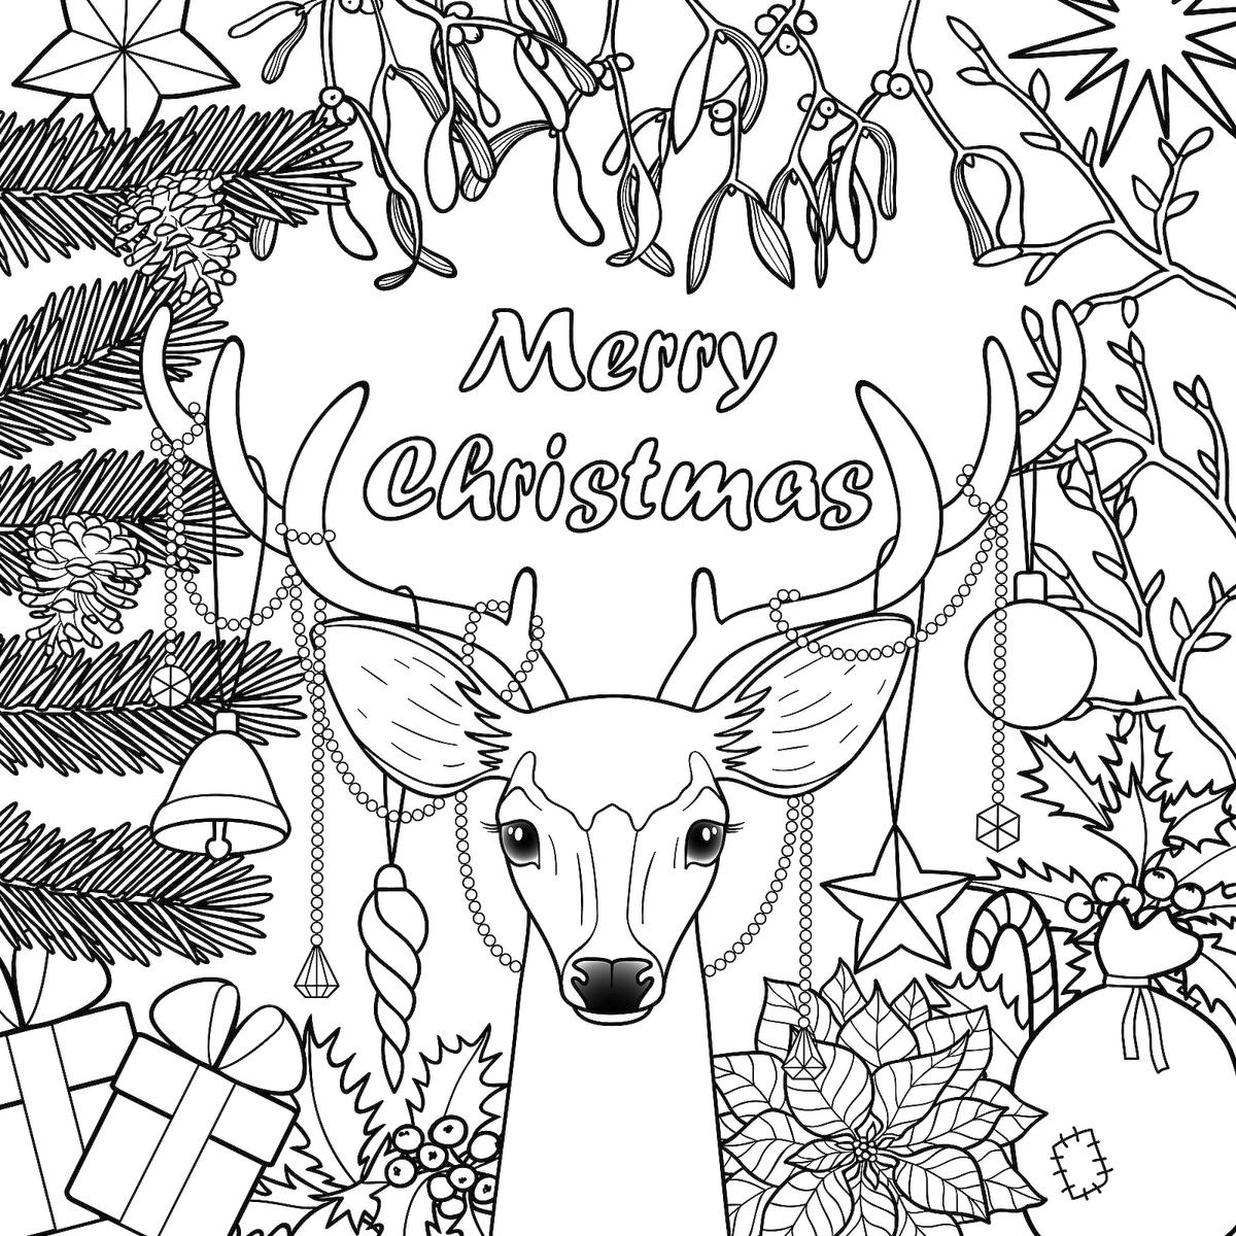 Get This Adult Christmas Coloring Pages Free to Print ...